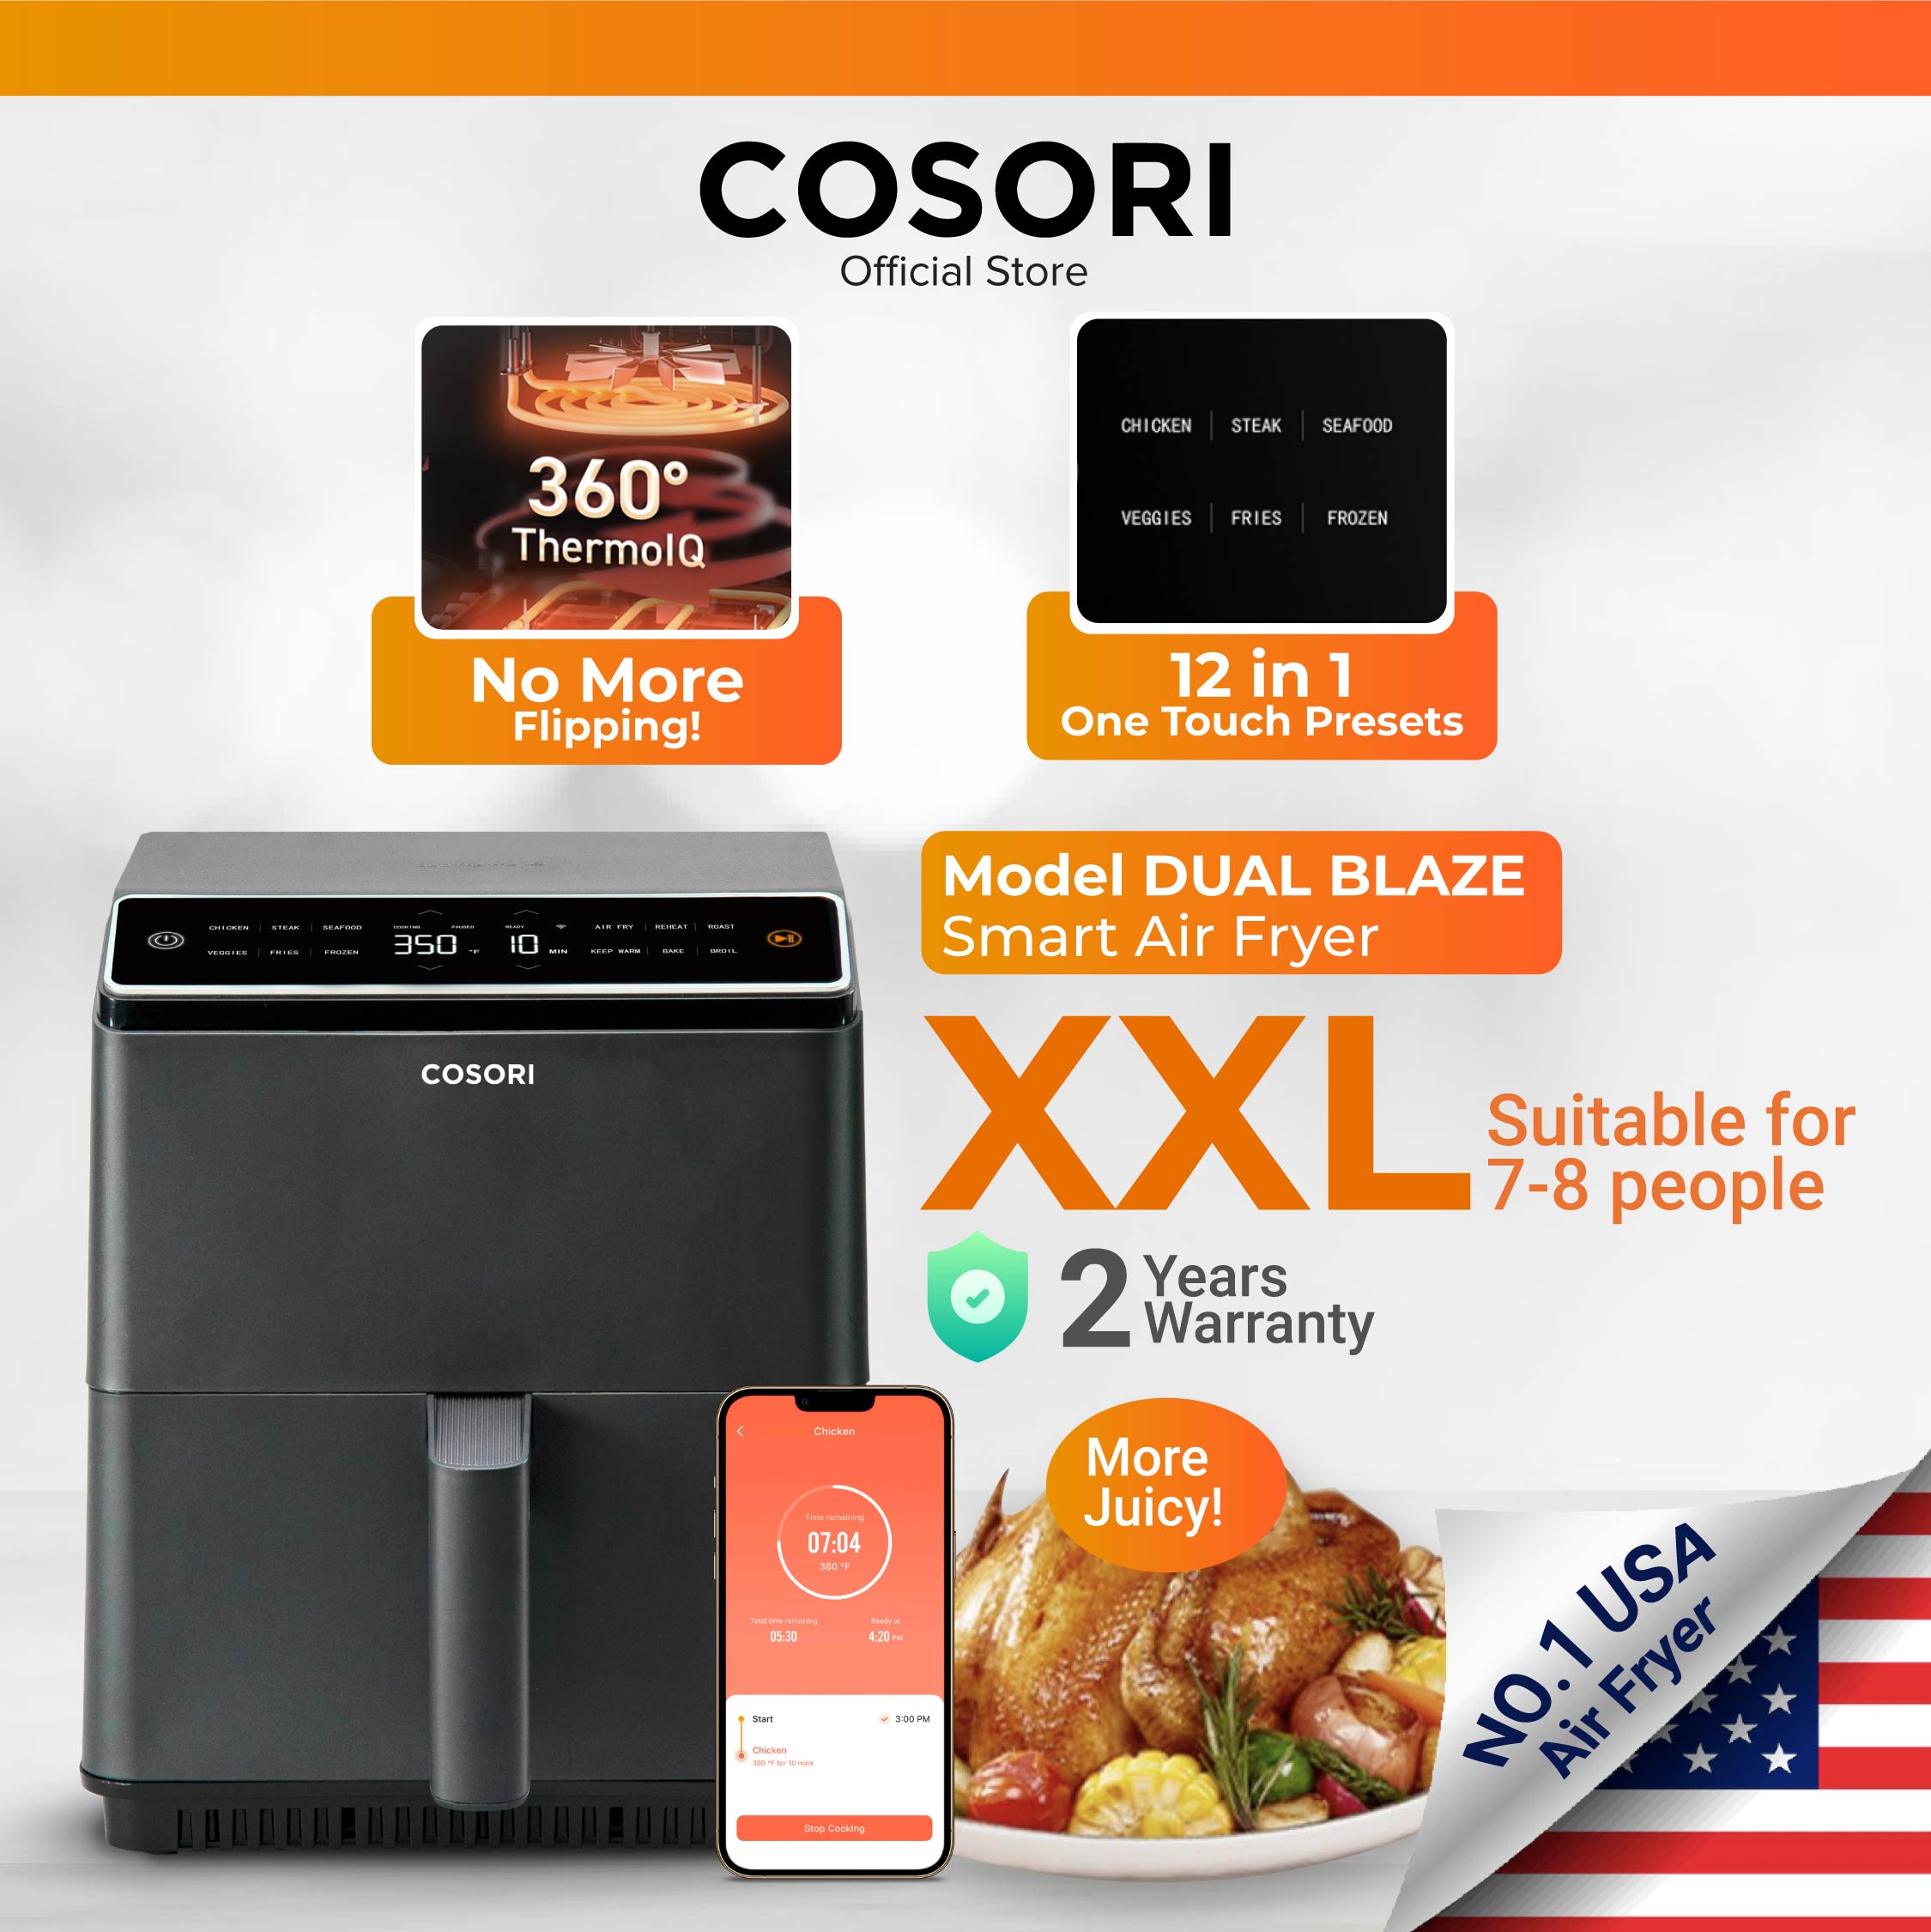 Shop COSORI Smart Air Fryer Oven Dual Blaze 6.4L, Double Heating Elements, No Shaking & No Preheating, APP Control, 12 Functions, Air Fry, Roast, Bake